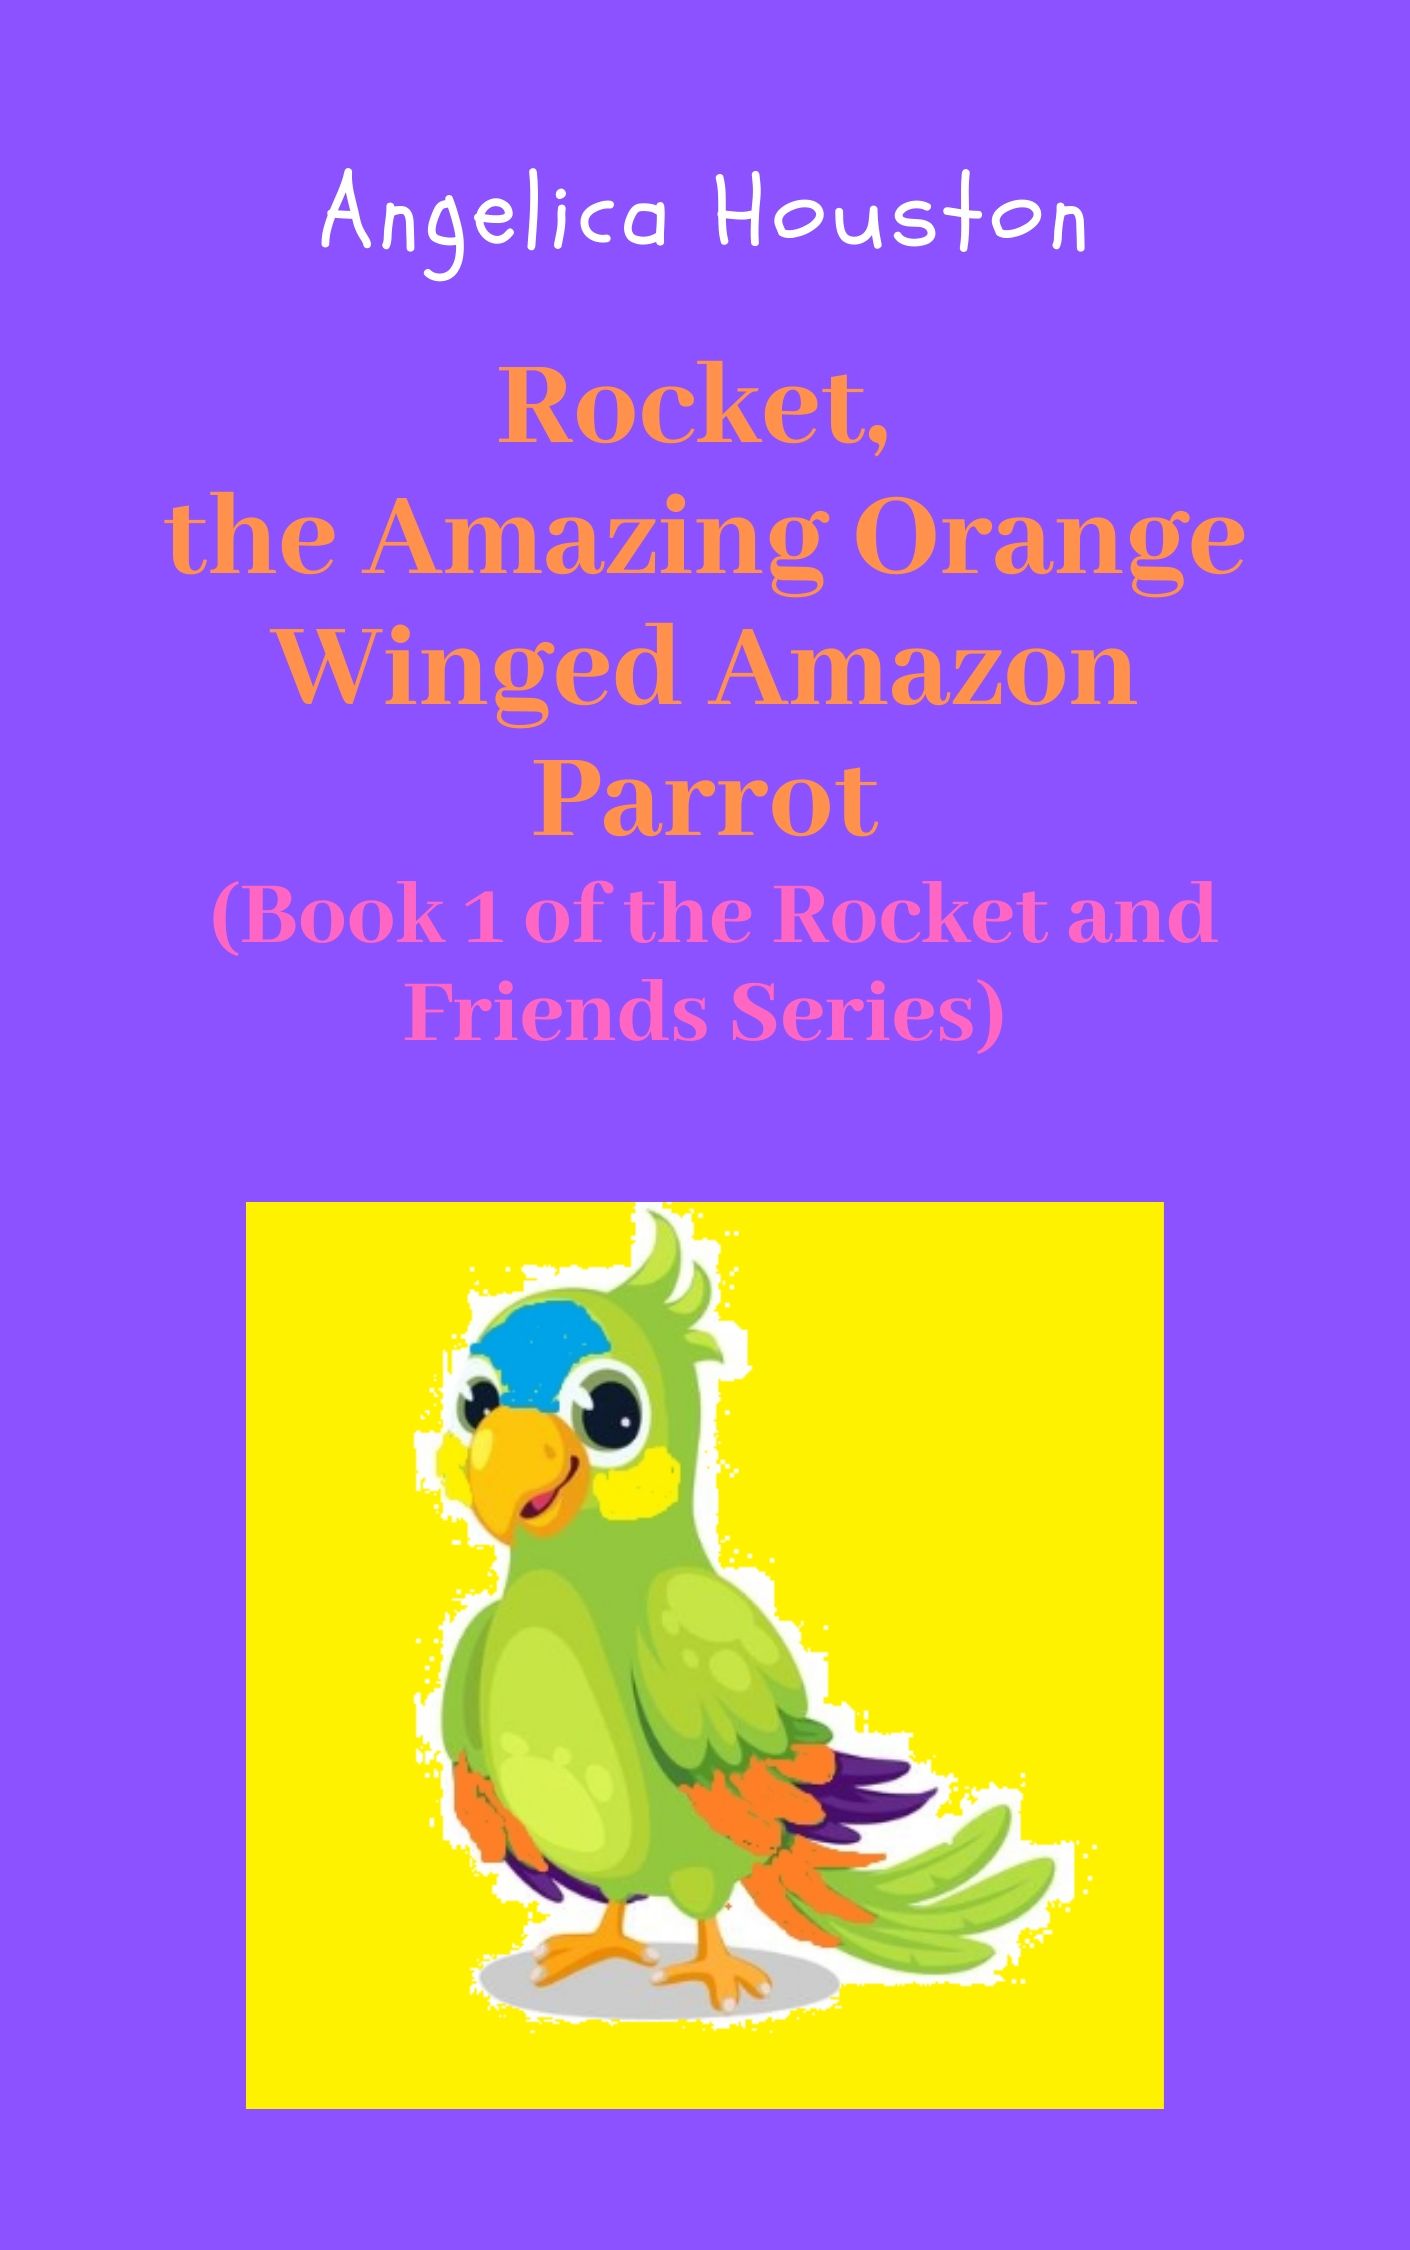 FREE: Rocket, the Amazing Orange Winged Amazon Parrot: (Book 1 of the Rocket and Friends Series) by Angelica Houston